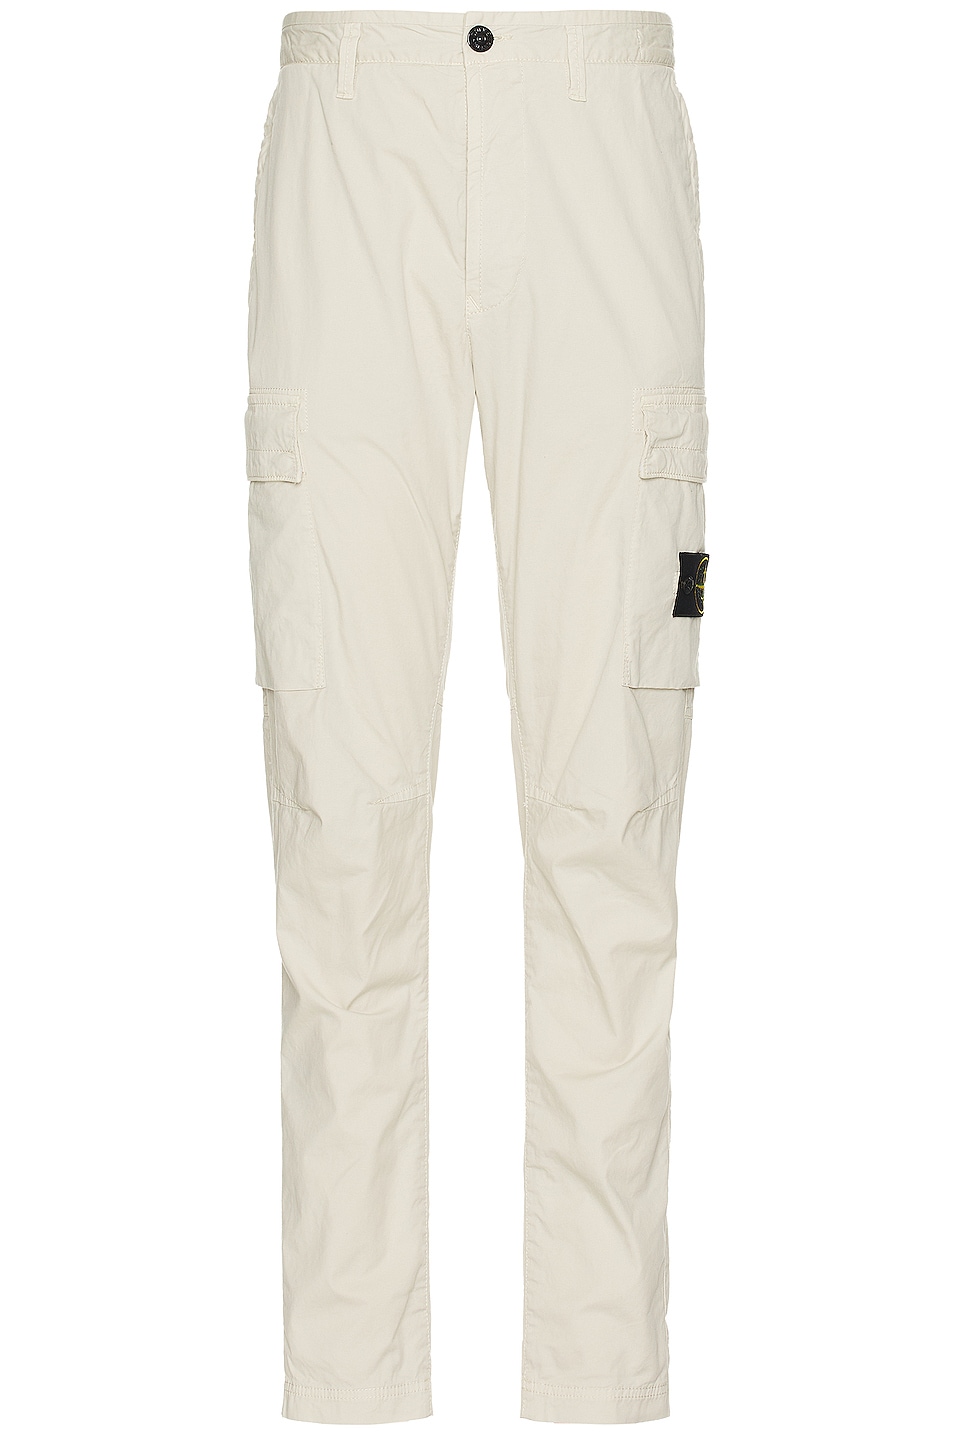 Image 1 of Stone Island Pants in Plaster